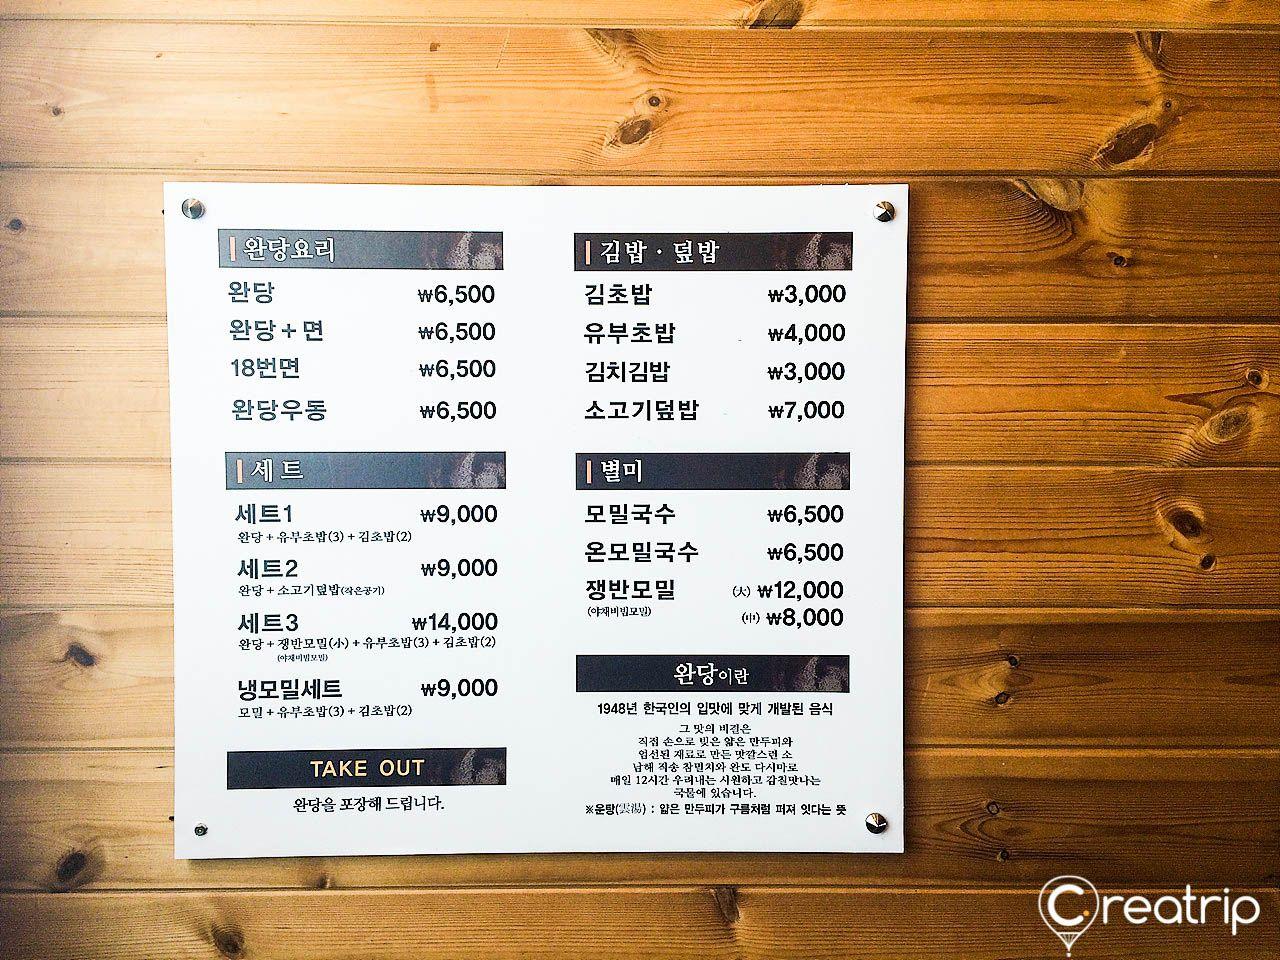 Menu board on wooden plank with cloud pattern and varnish coating.